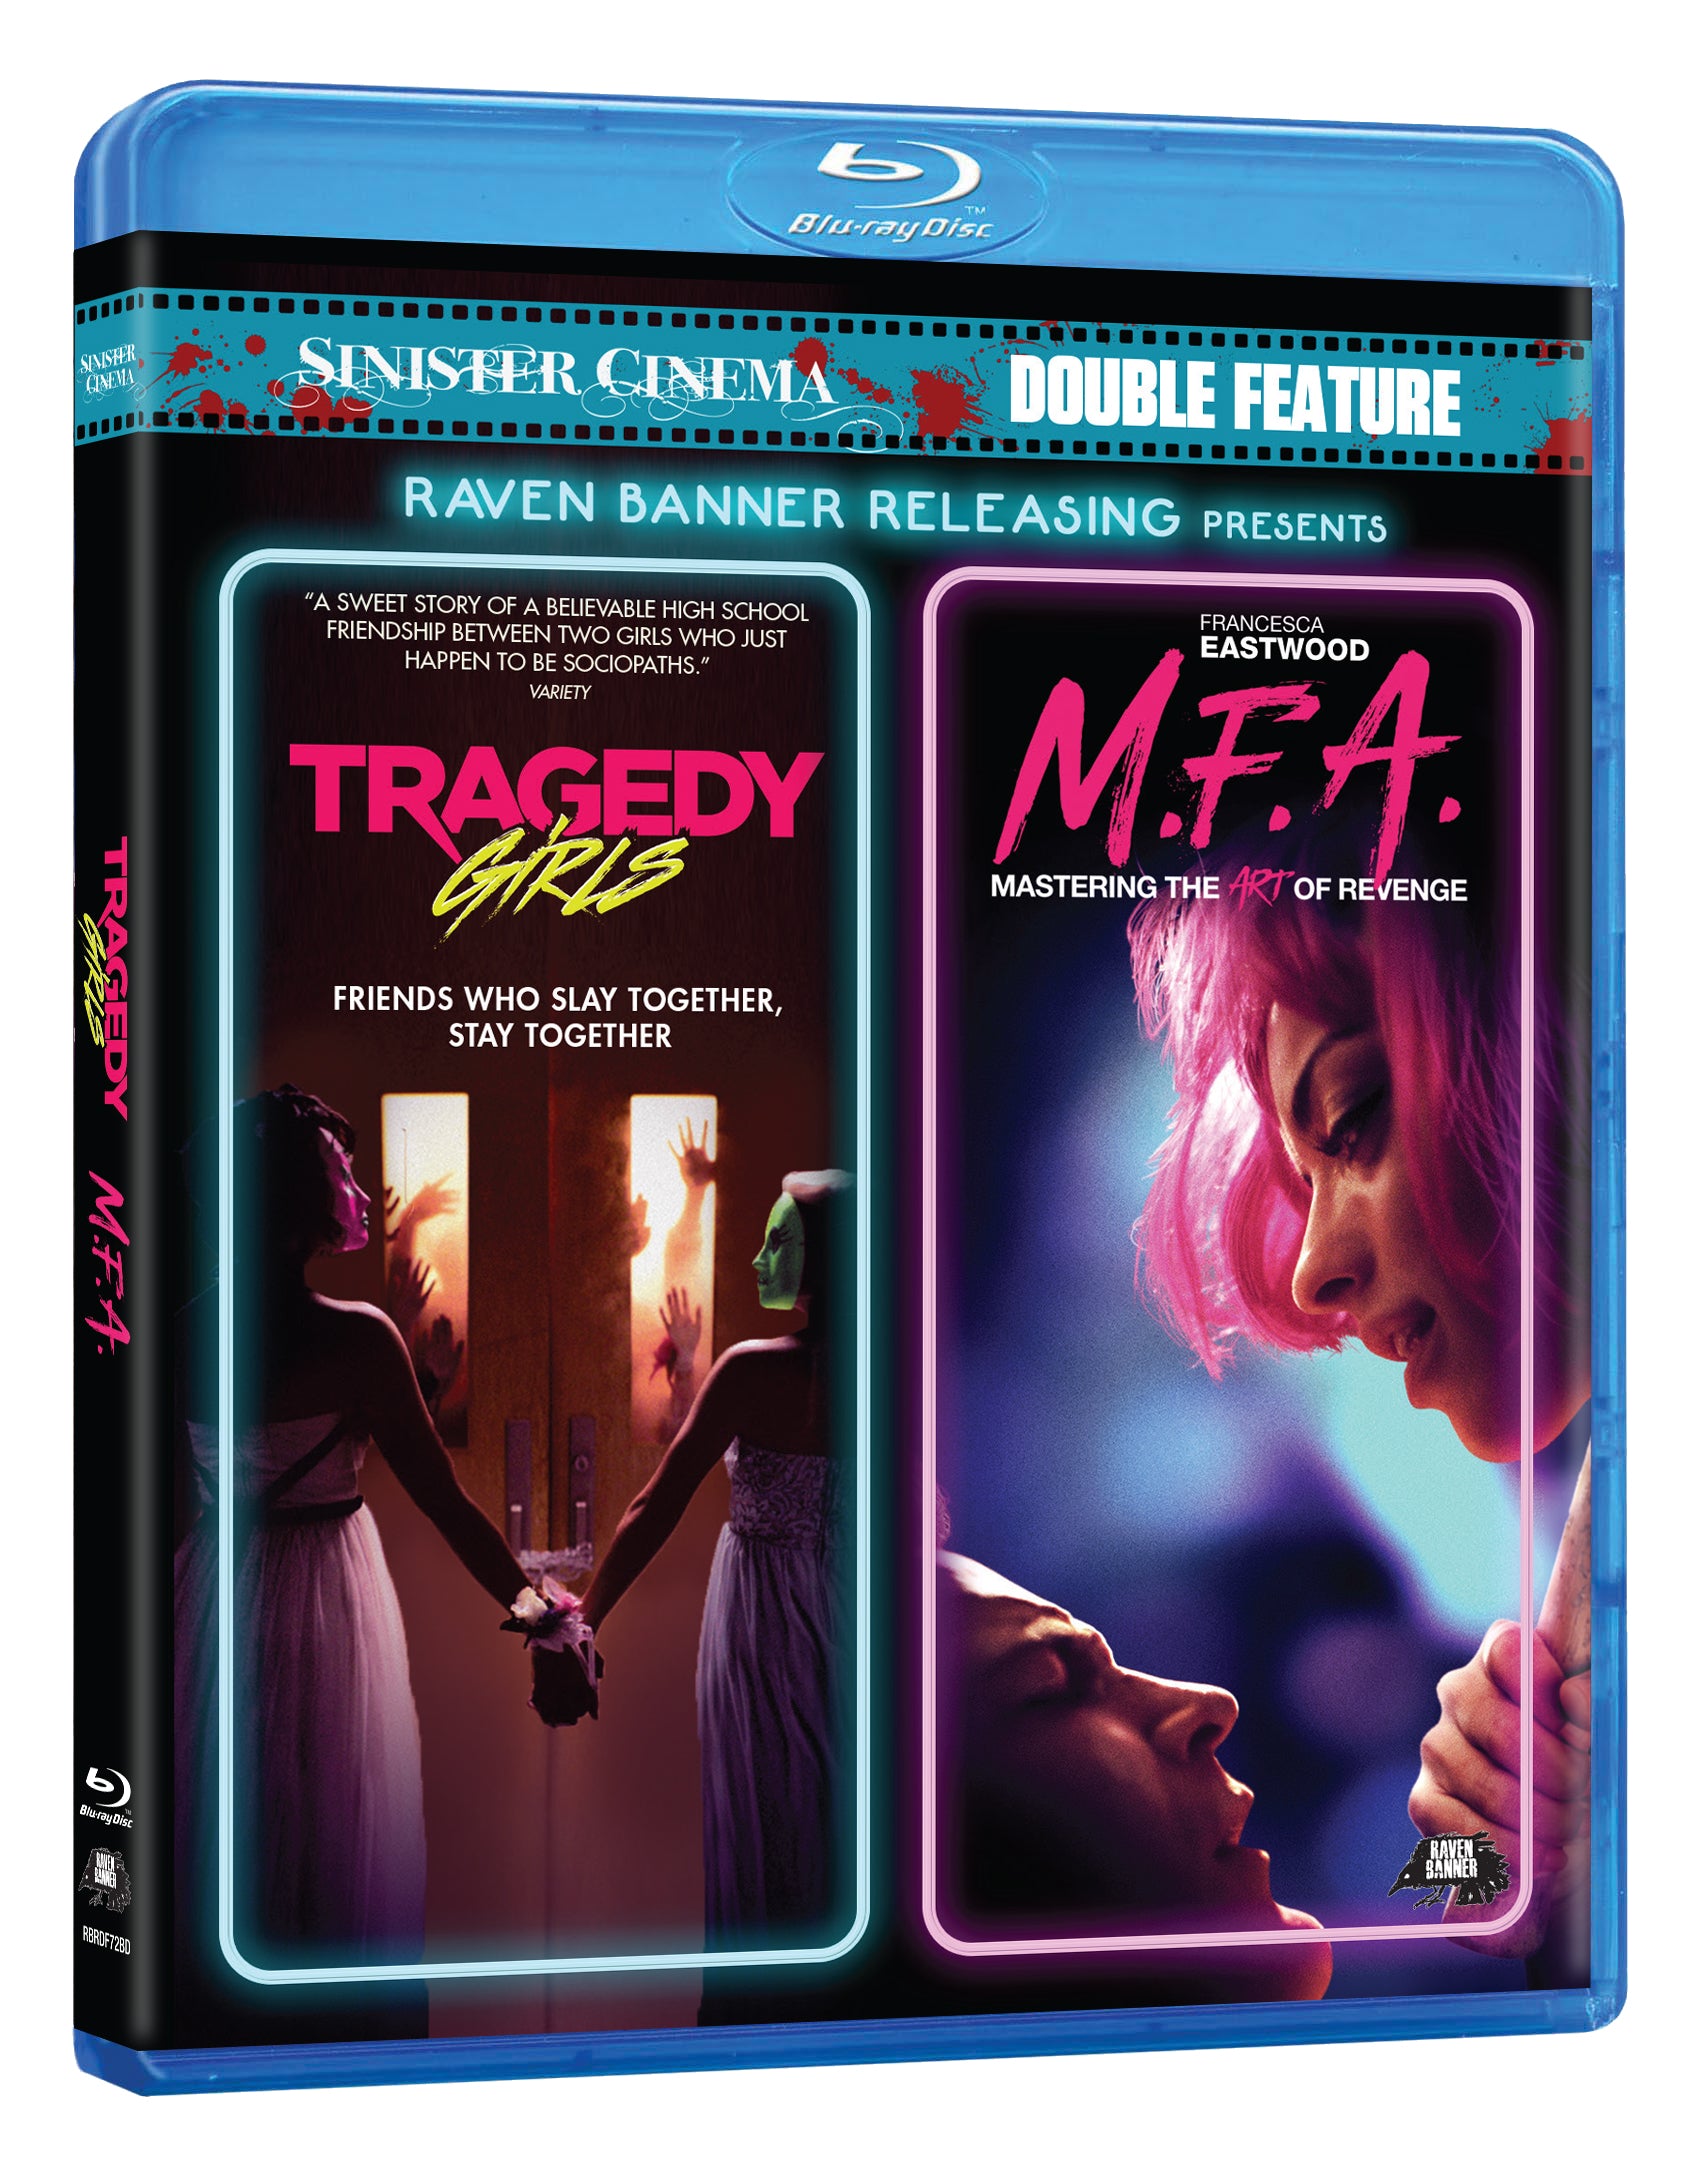 TRAGEDY GIRLS & M.F.A - DOUBLE FEATURE BLU-RAY